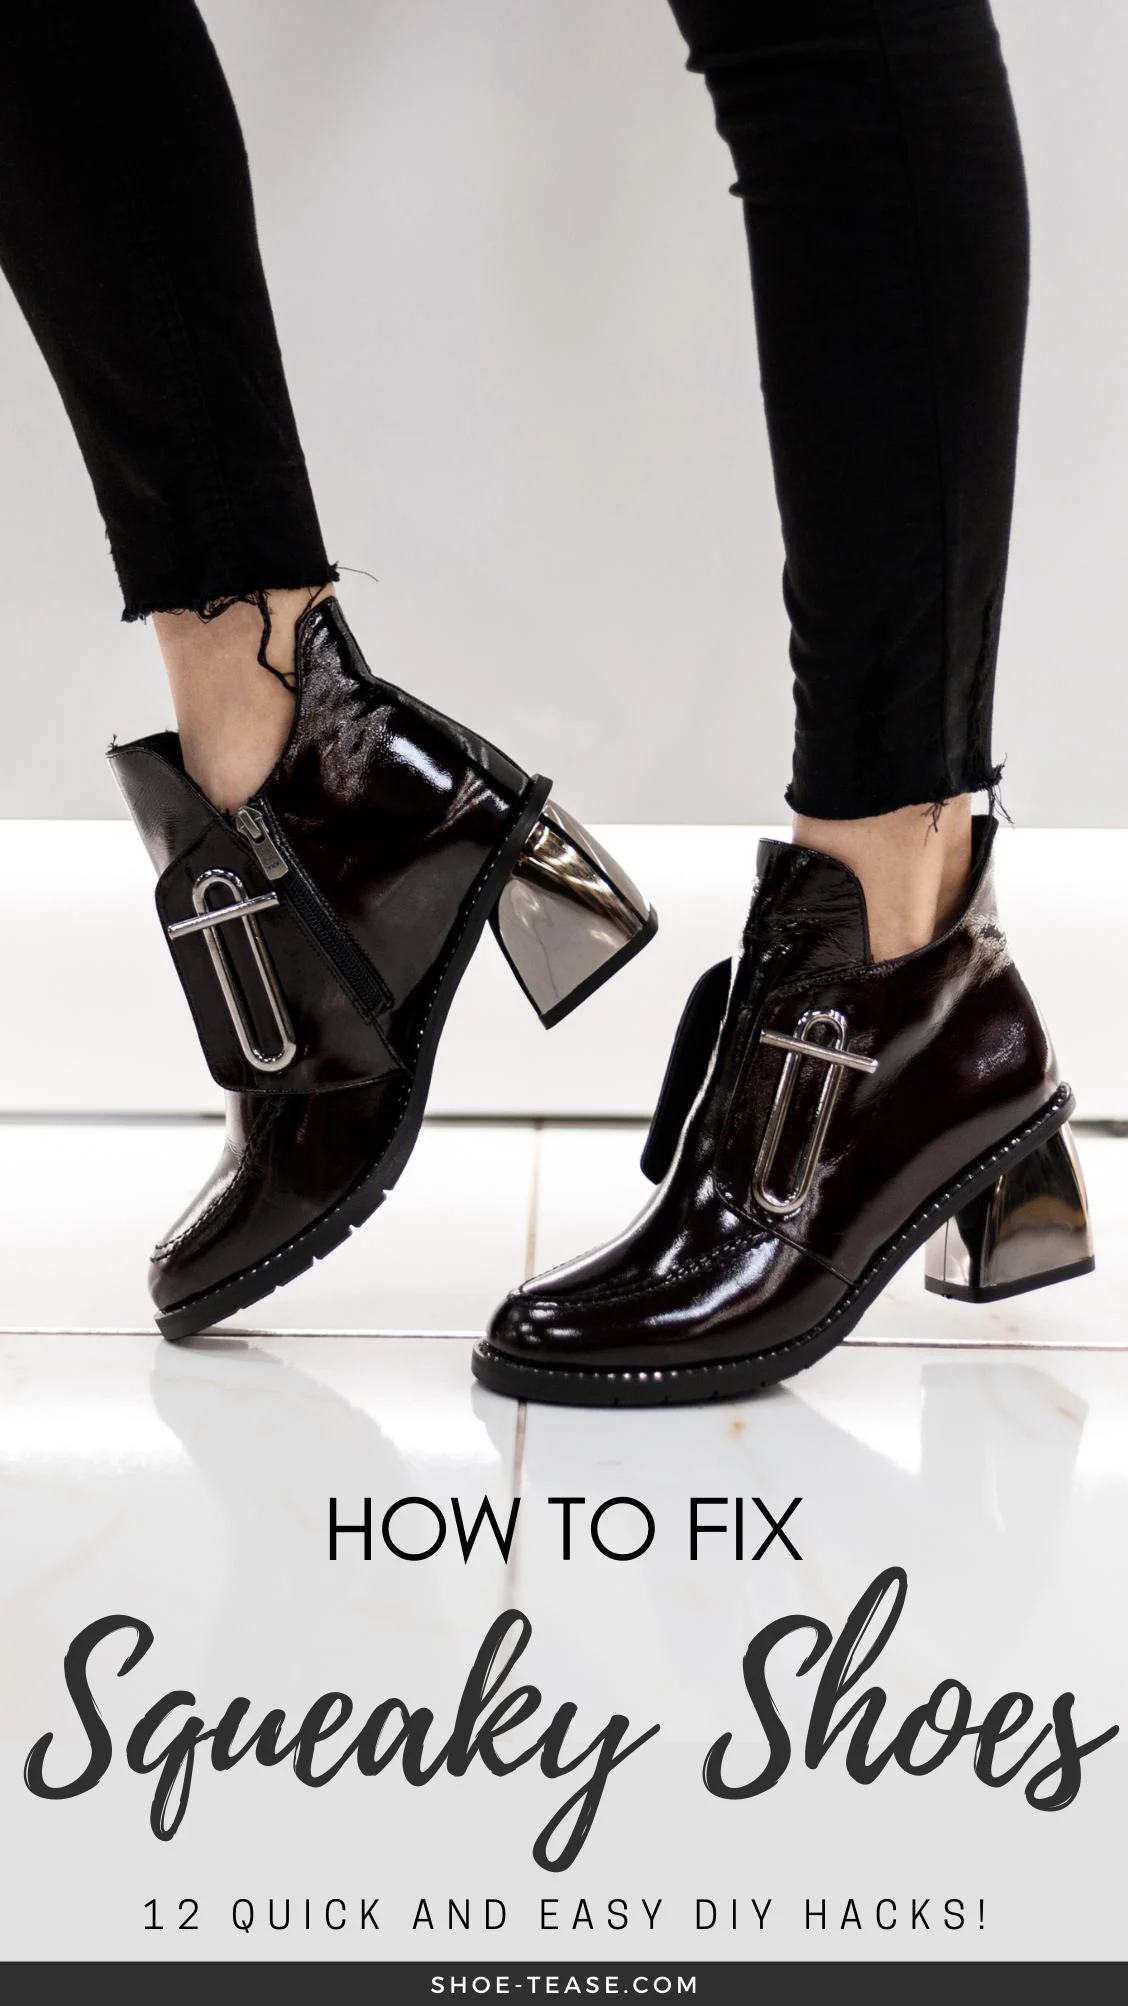 How to fix squeaky shoes text under image of woman wearing patent leather booties walking on shiny tiles.